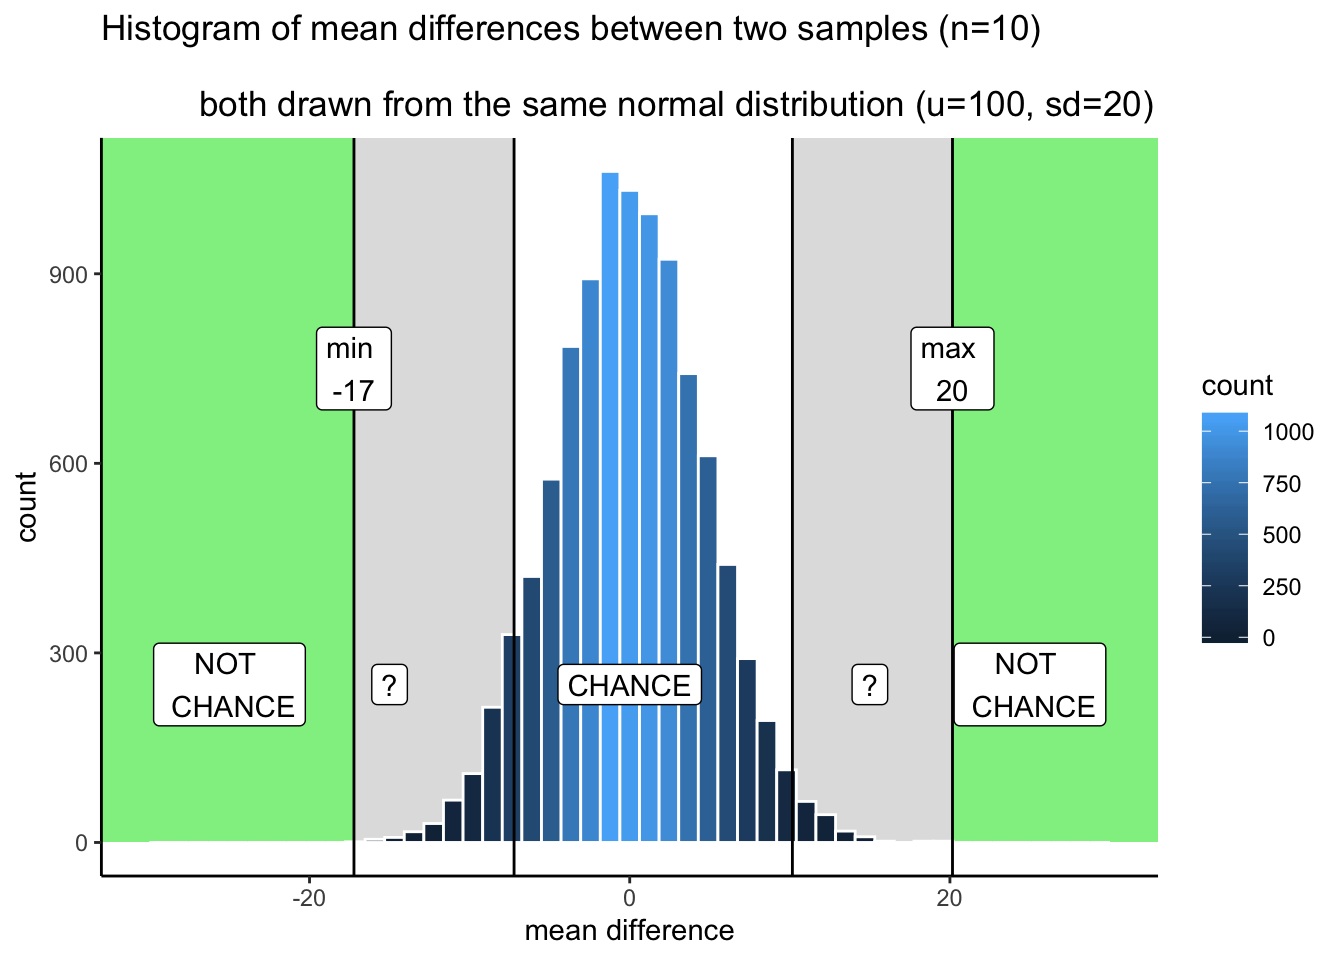 The shading of the blue bars indicates levels of confidence in whether a difference could have been produced by chance. Darker bars represent increased confidence that the difference was not produced by chance. Bars get darker as the mean difference increases in absolute value